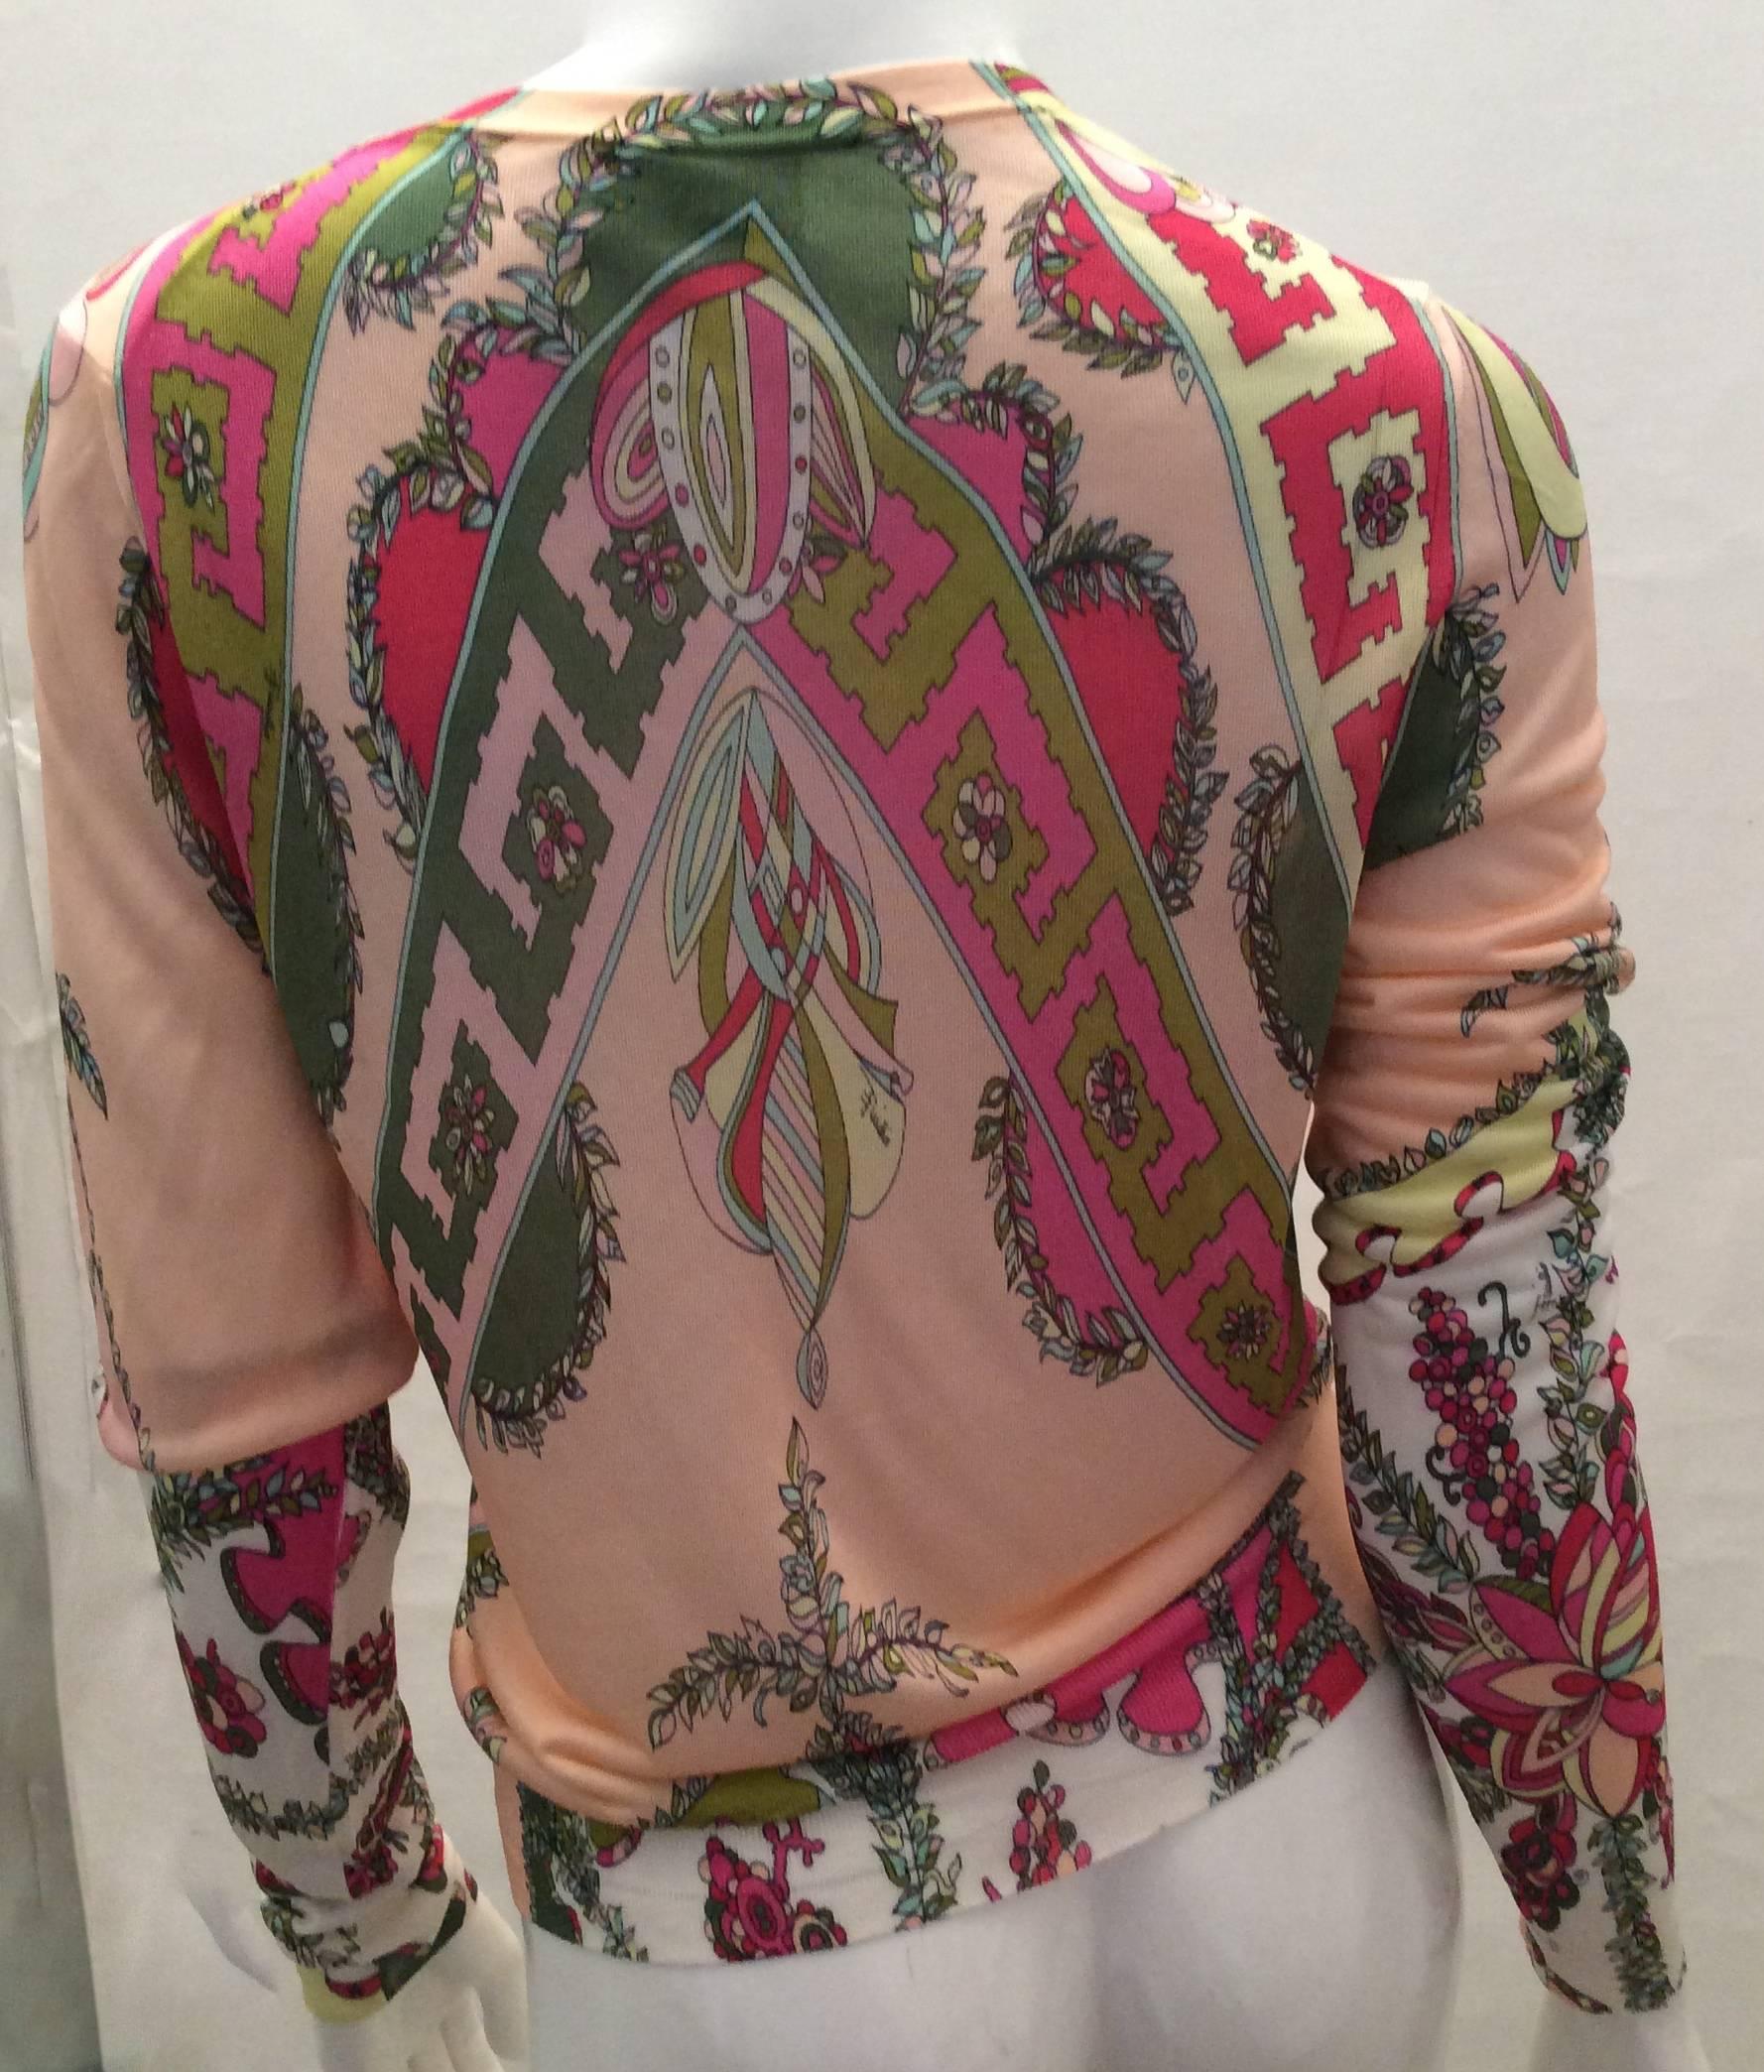 This set is absolutely magnificent and truly unique. It encompasses a new Emilio Pucci button down cardigan with a matching silk scarf. The cardigan is in beautiful shades of pink, peach and greens in a typical Emilio Pucci beautiful design. The